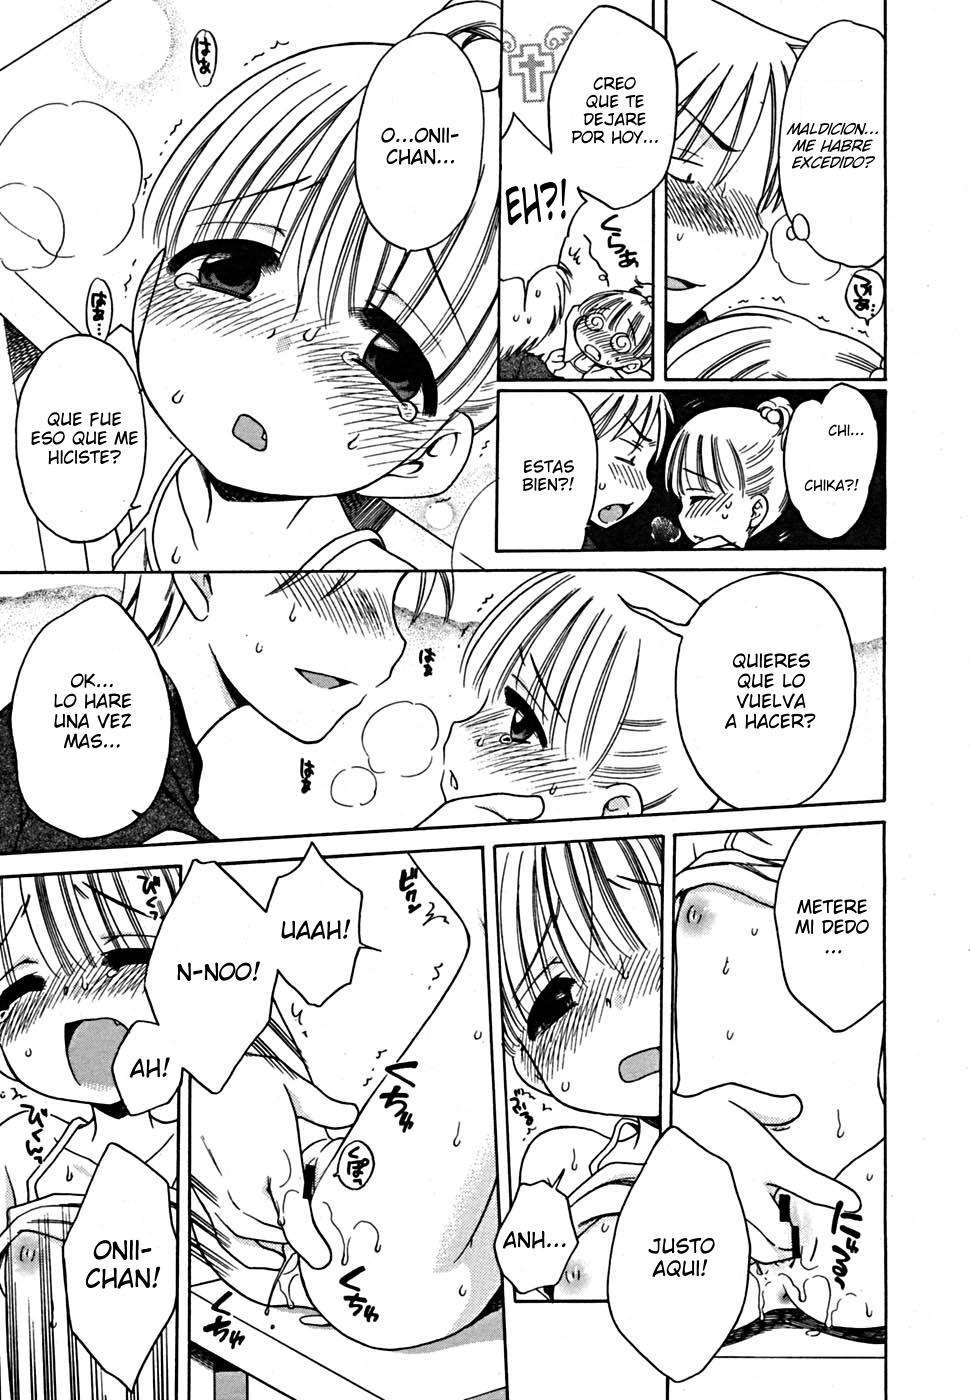 Me gustas Onii-chan! Chapter-3 - 10